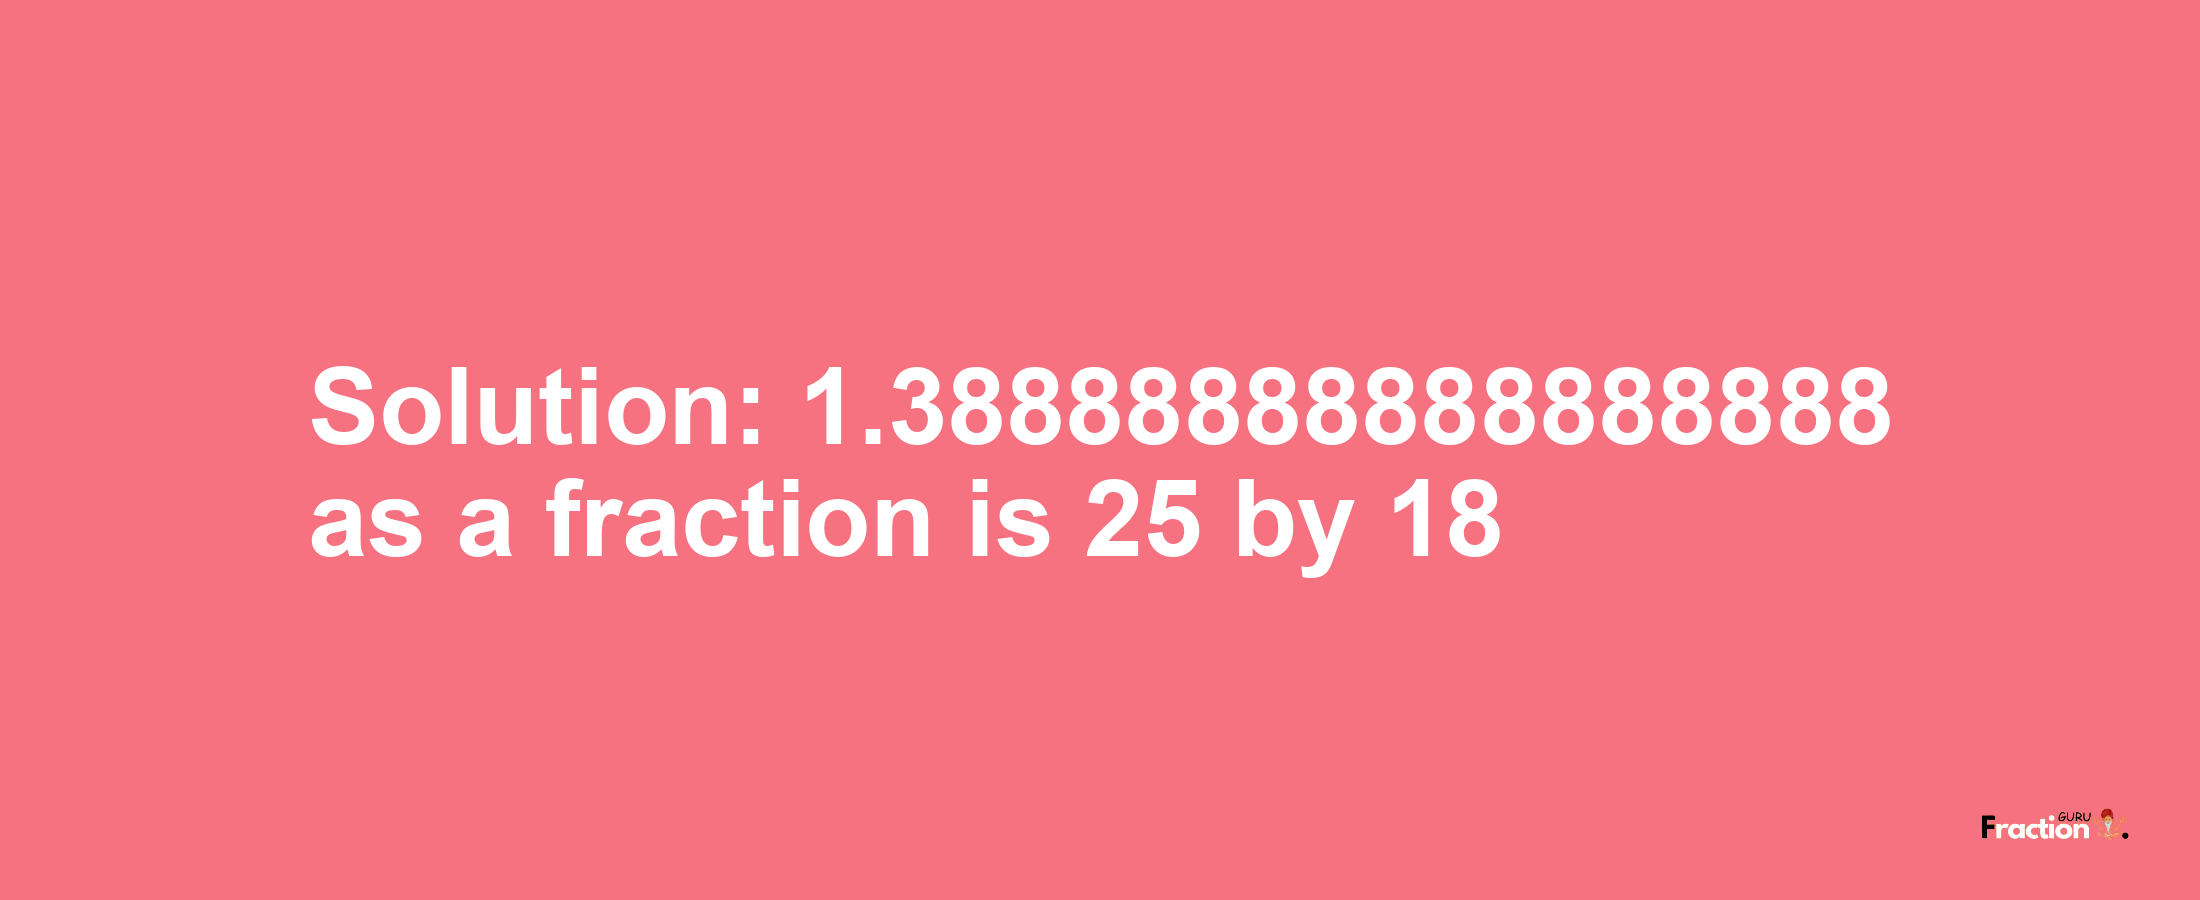 Solution:1.38888888888888888 as a fraction is 25/18